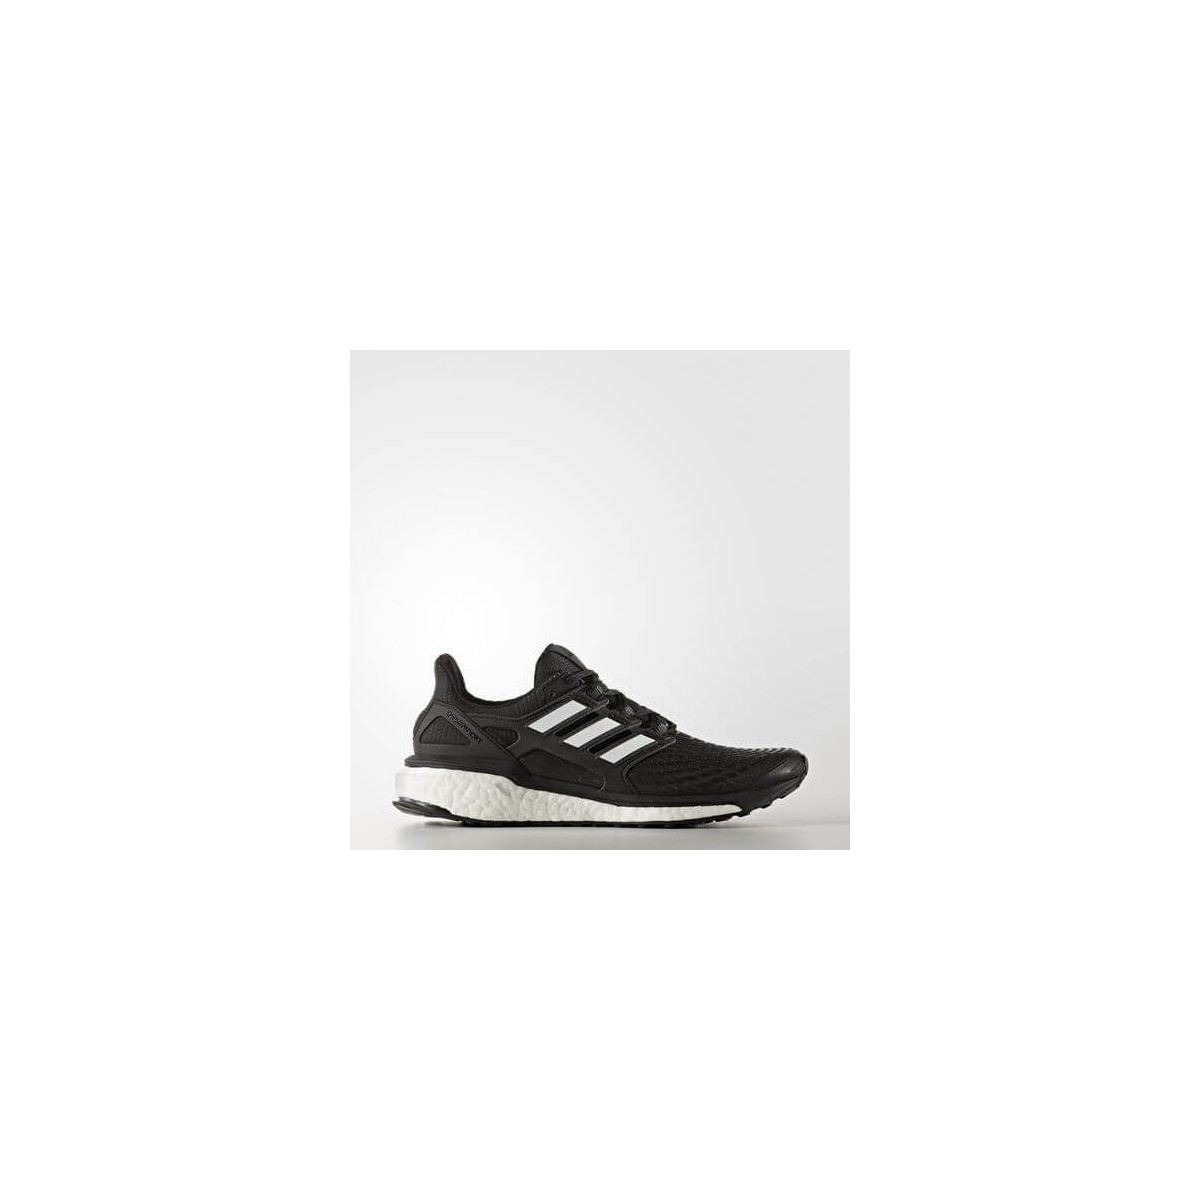 Running shoes Adidas Energy Boost 3 color woman AW17